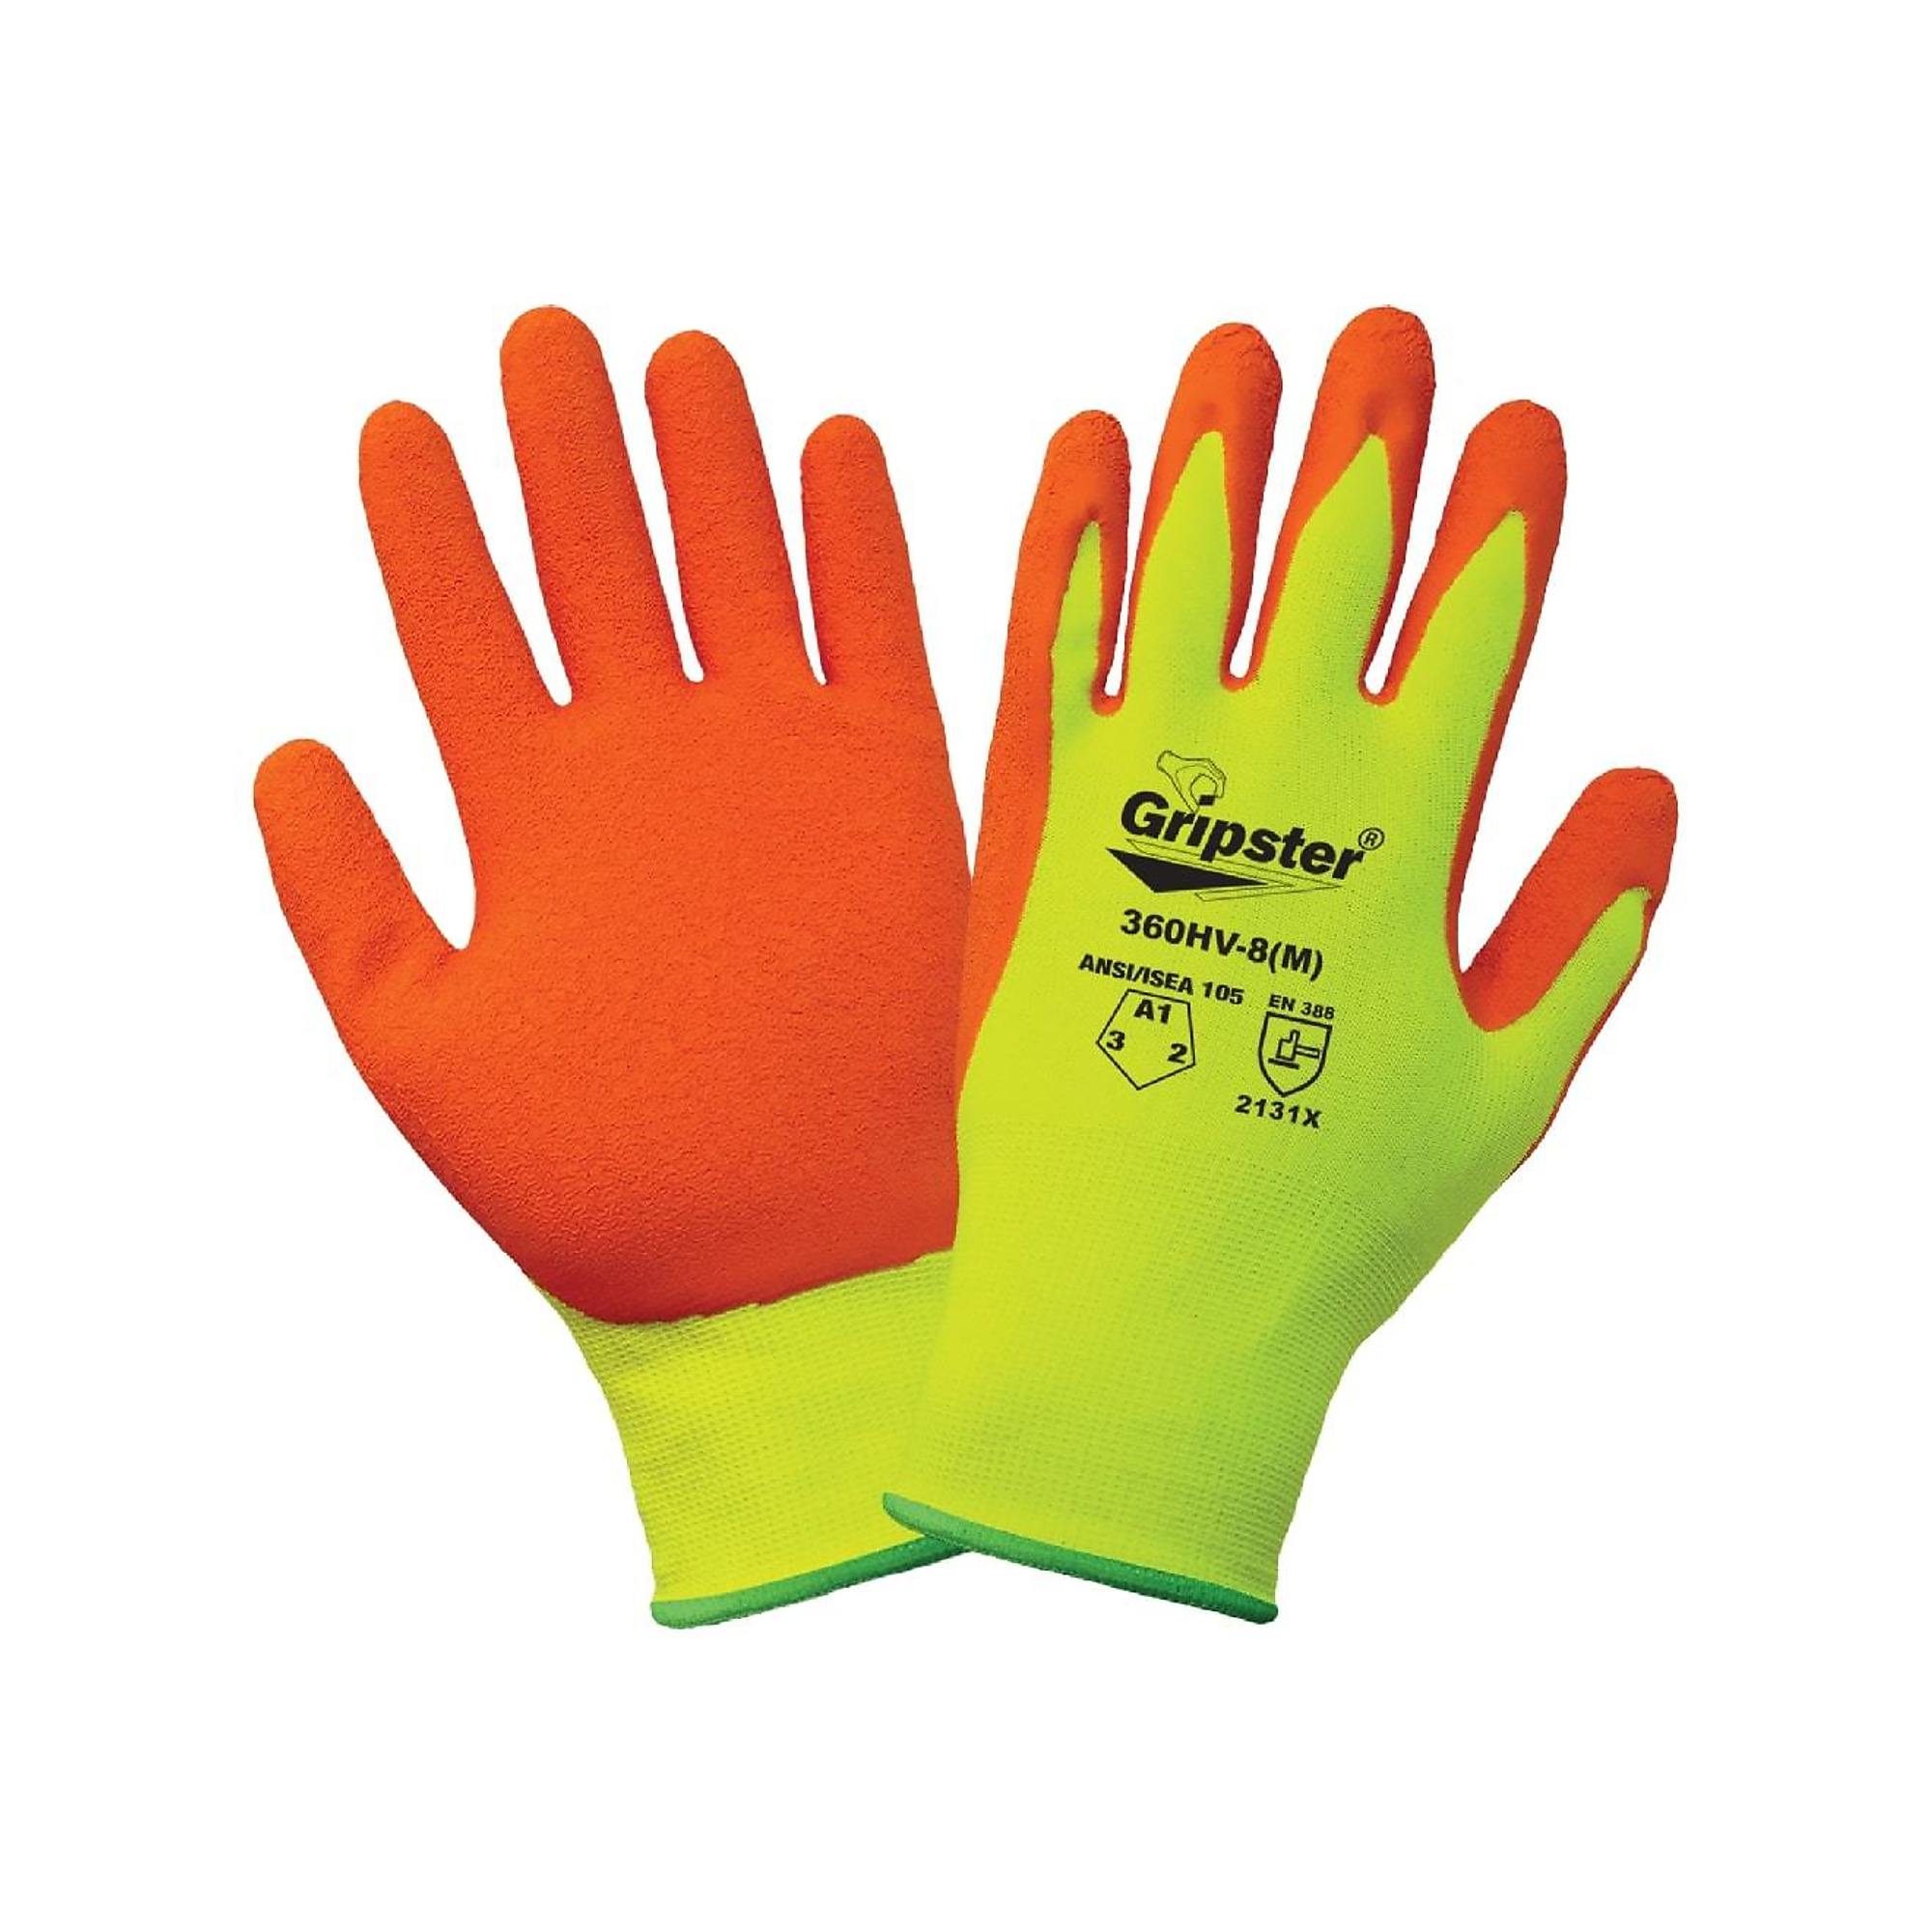 Global Glove Gripster , HV Yel, Org Rubber Palm, Cut Resistant A1 Gloves - 12 Pairs, Size XL, Color High Visibility Yellow/Orange, Included (qty.) 12